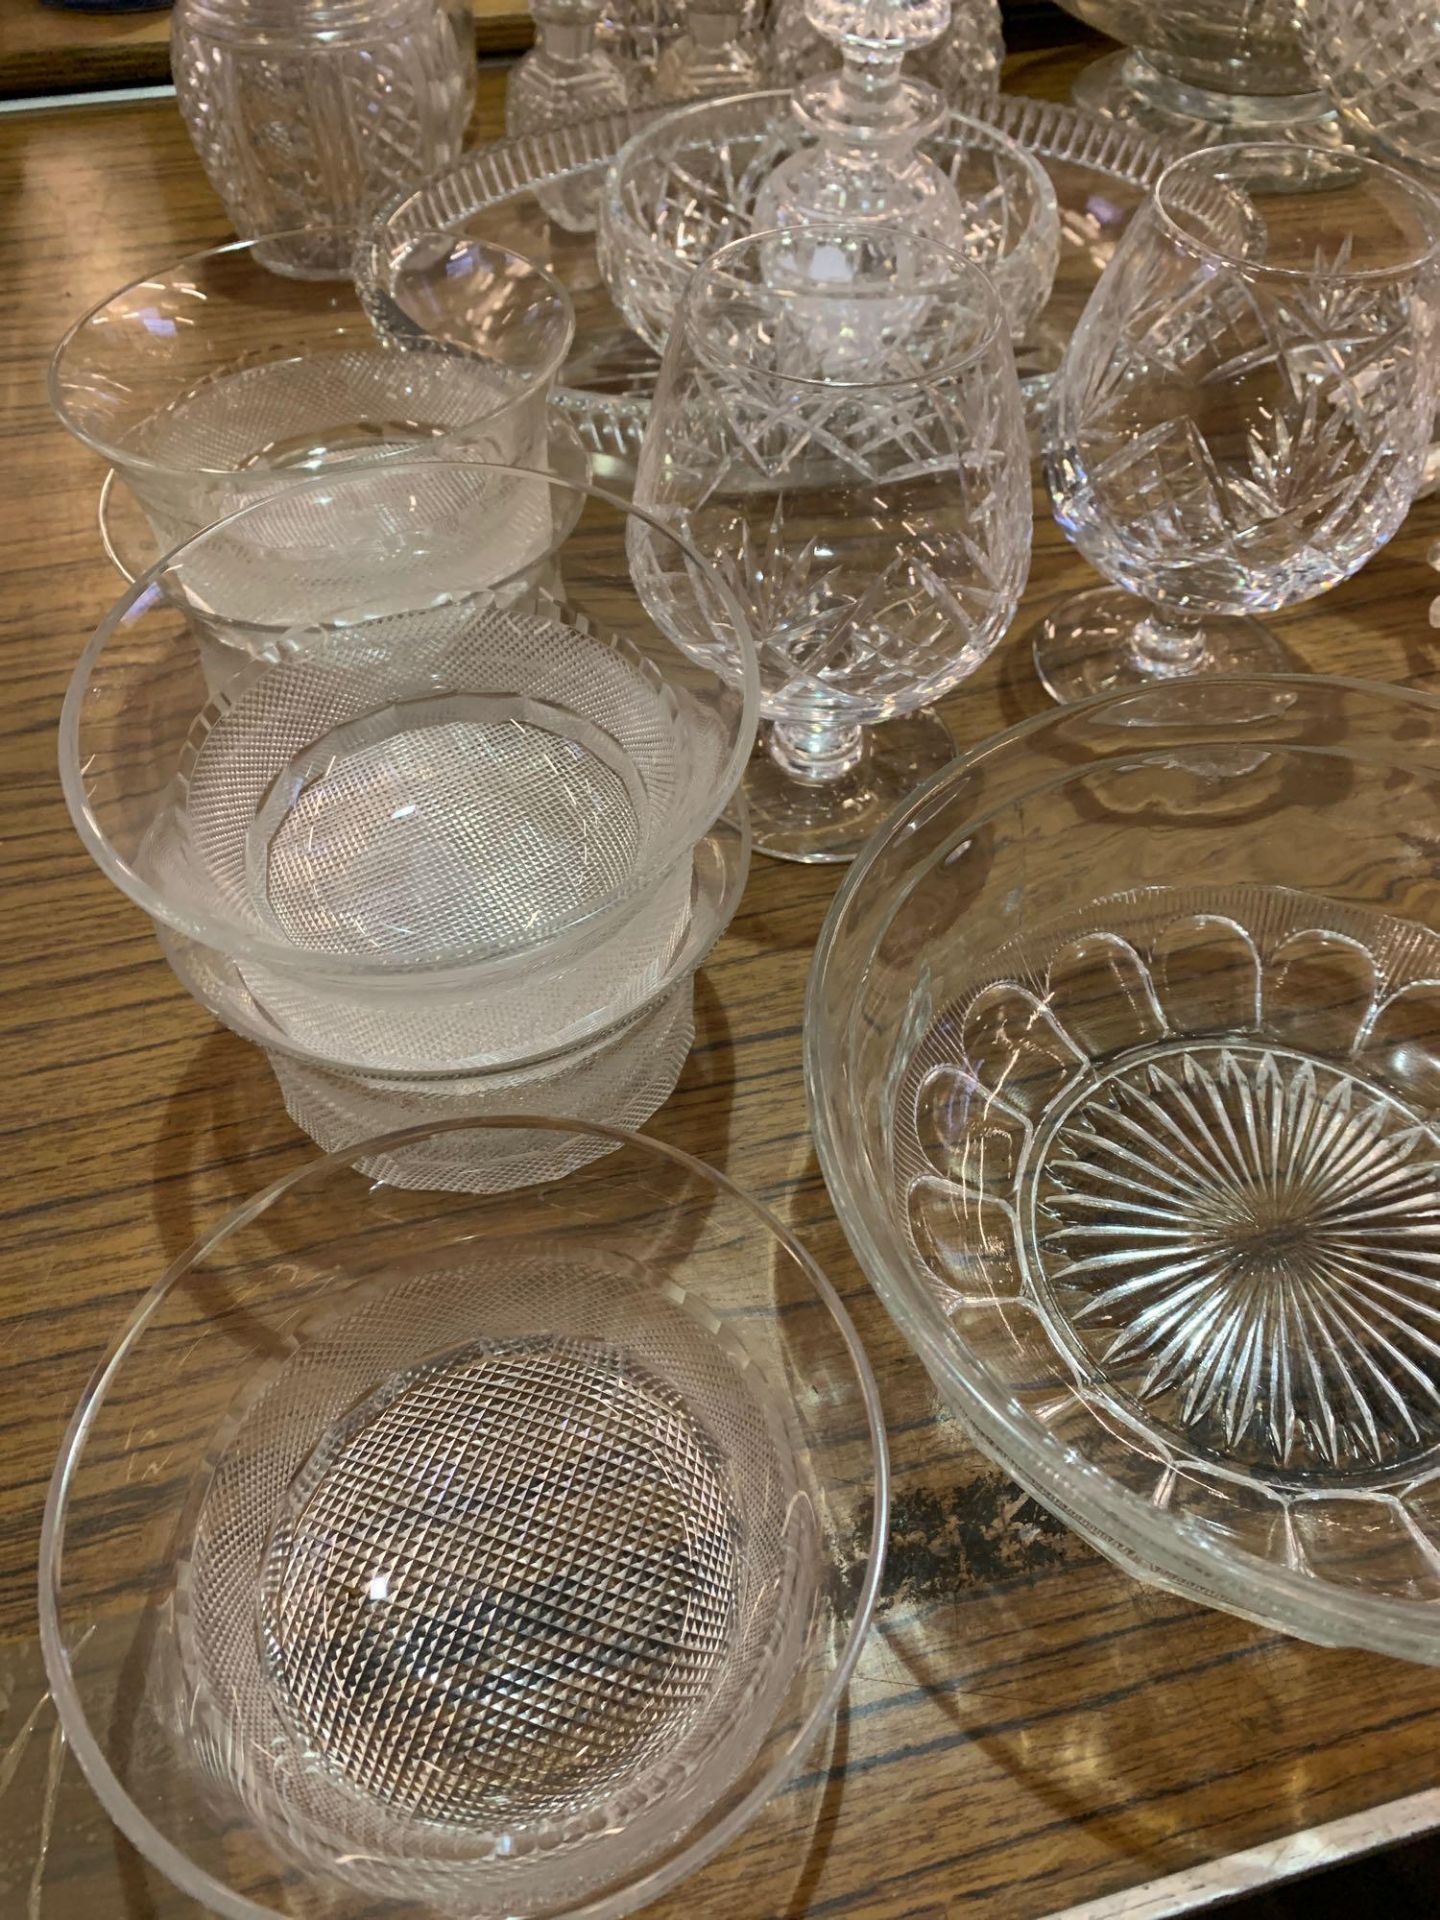 Three cut glass decanters and other cut glass items - Image 3 of 5